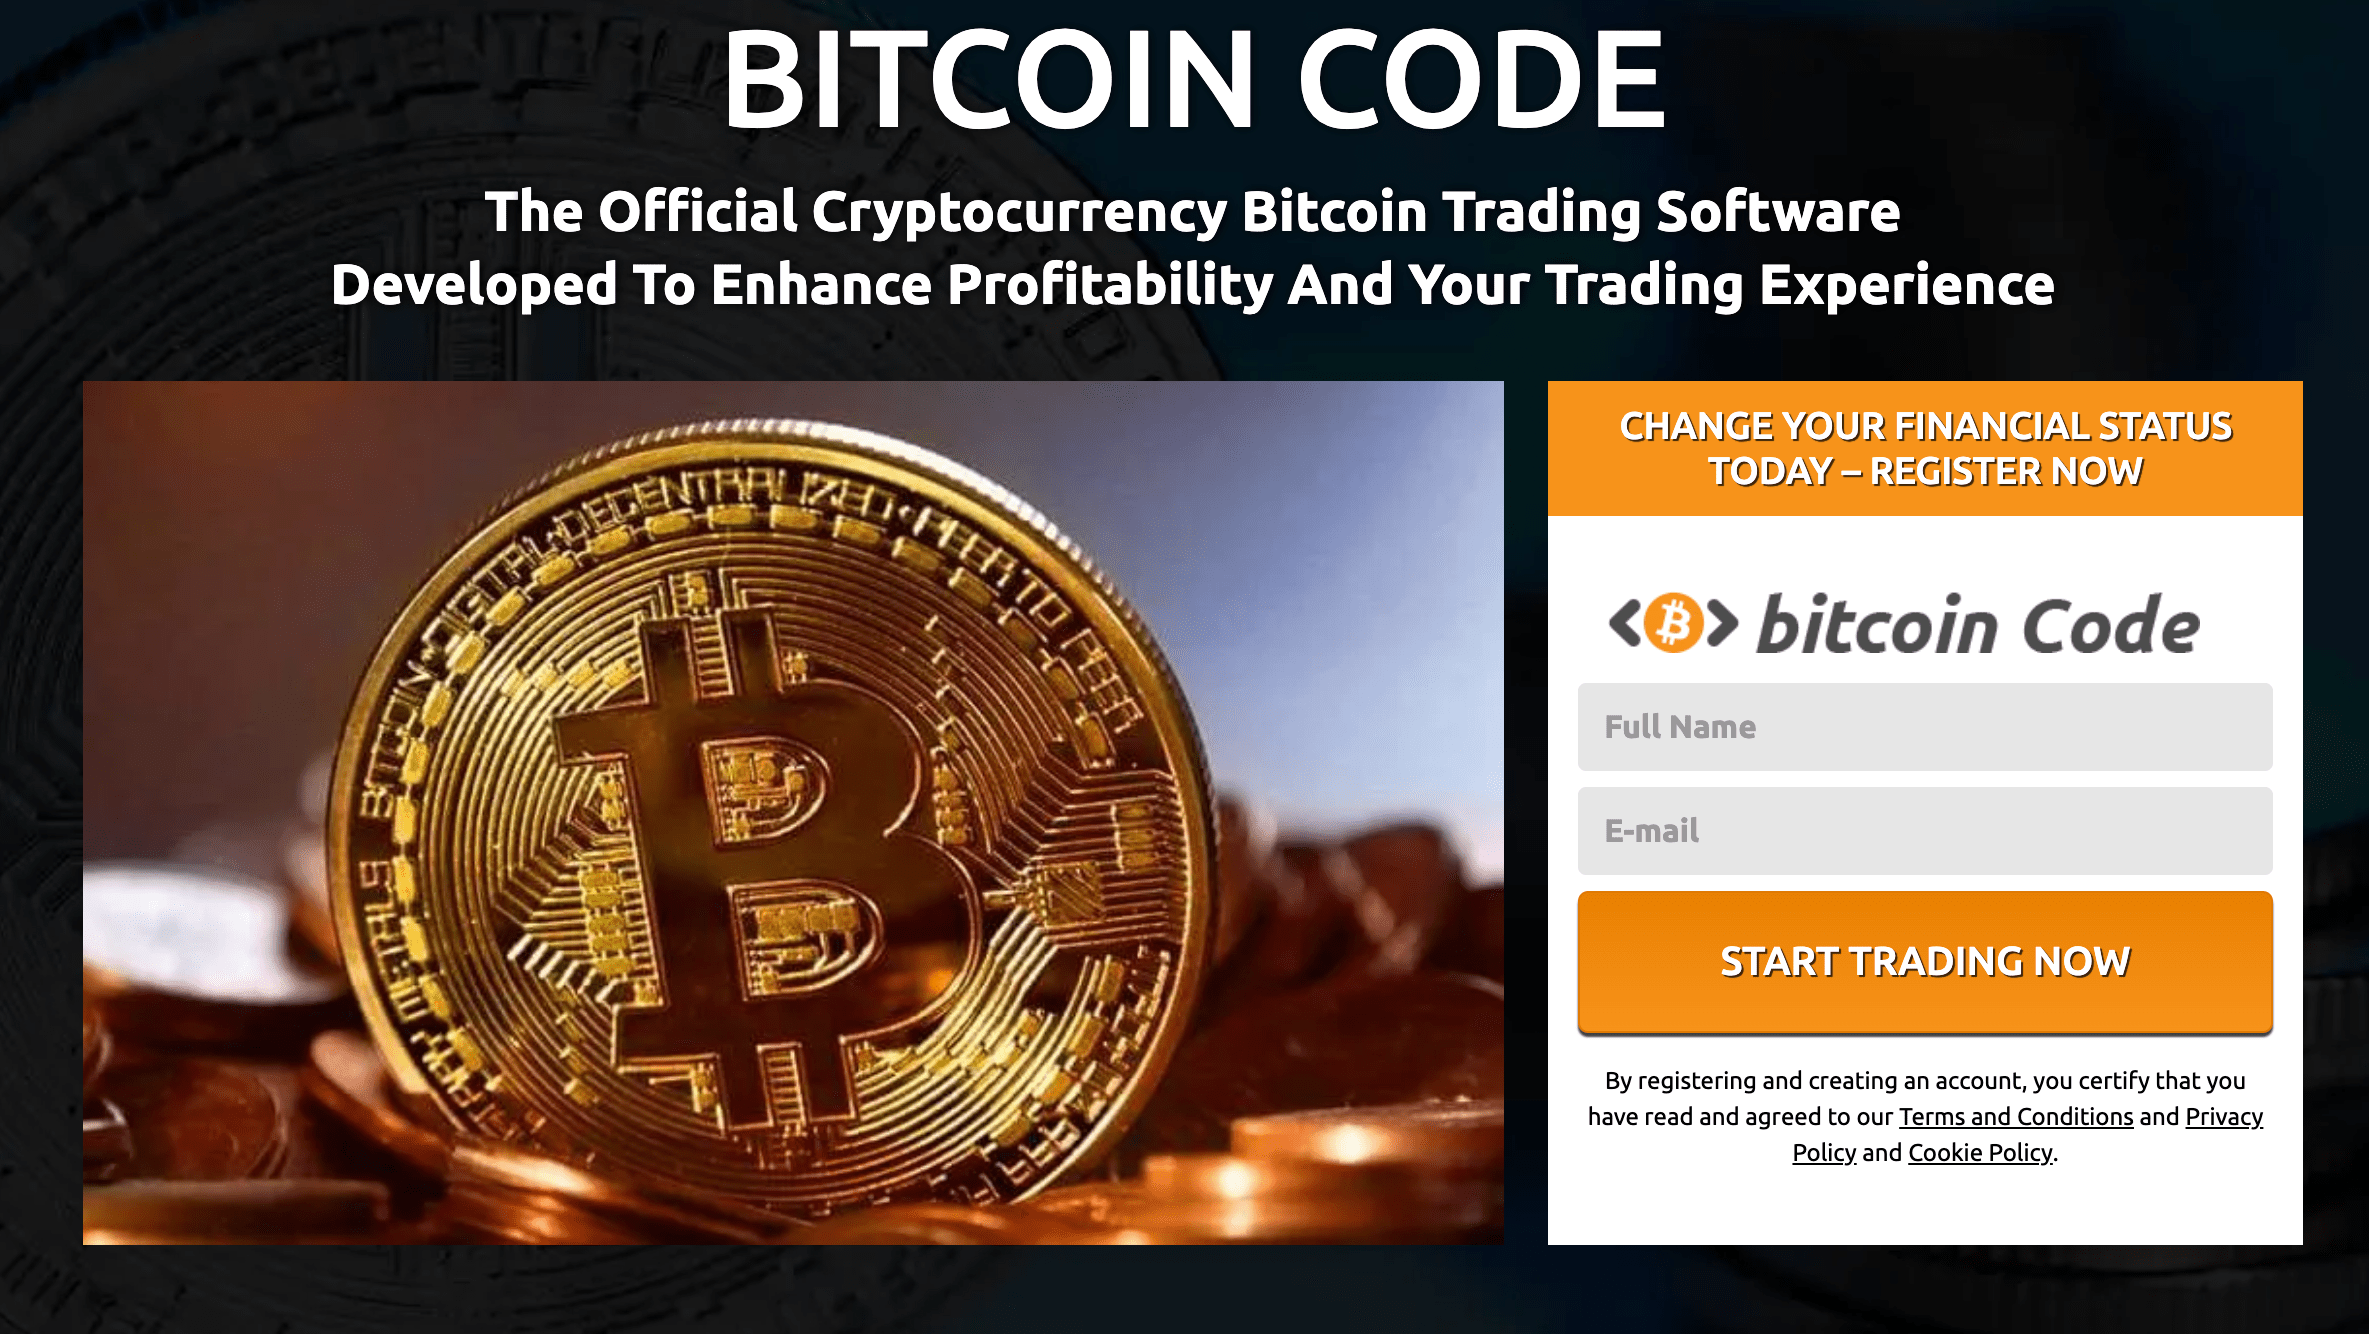 Is Bitcoin Code Scam? Read Bitcoin Code Review to Know All You Need